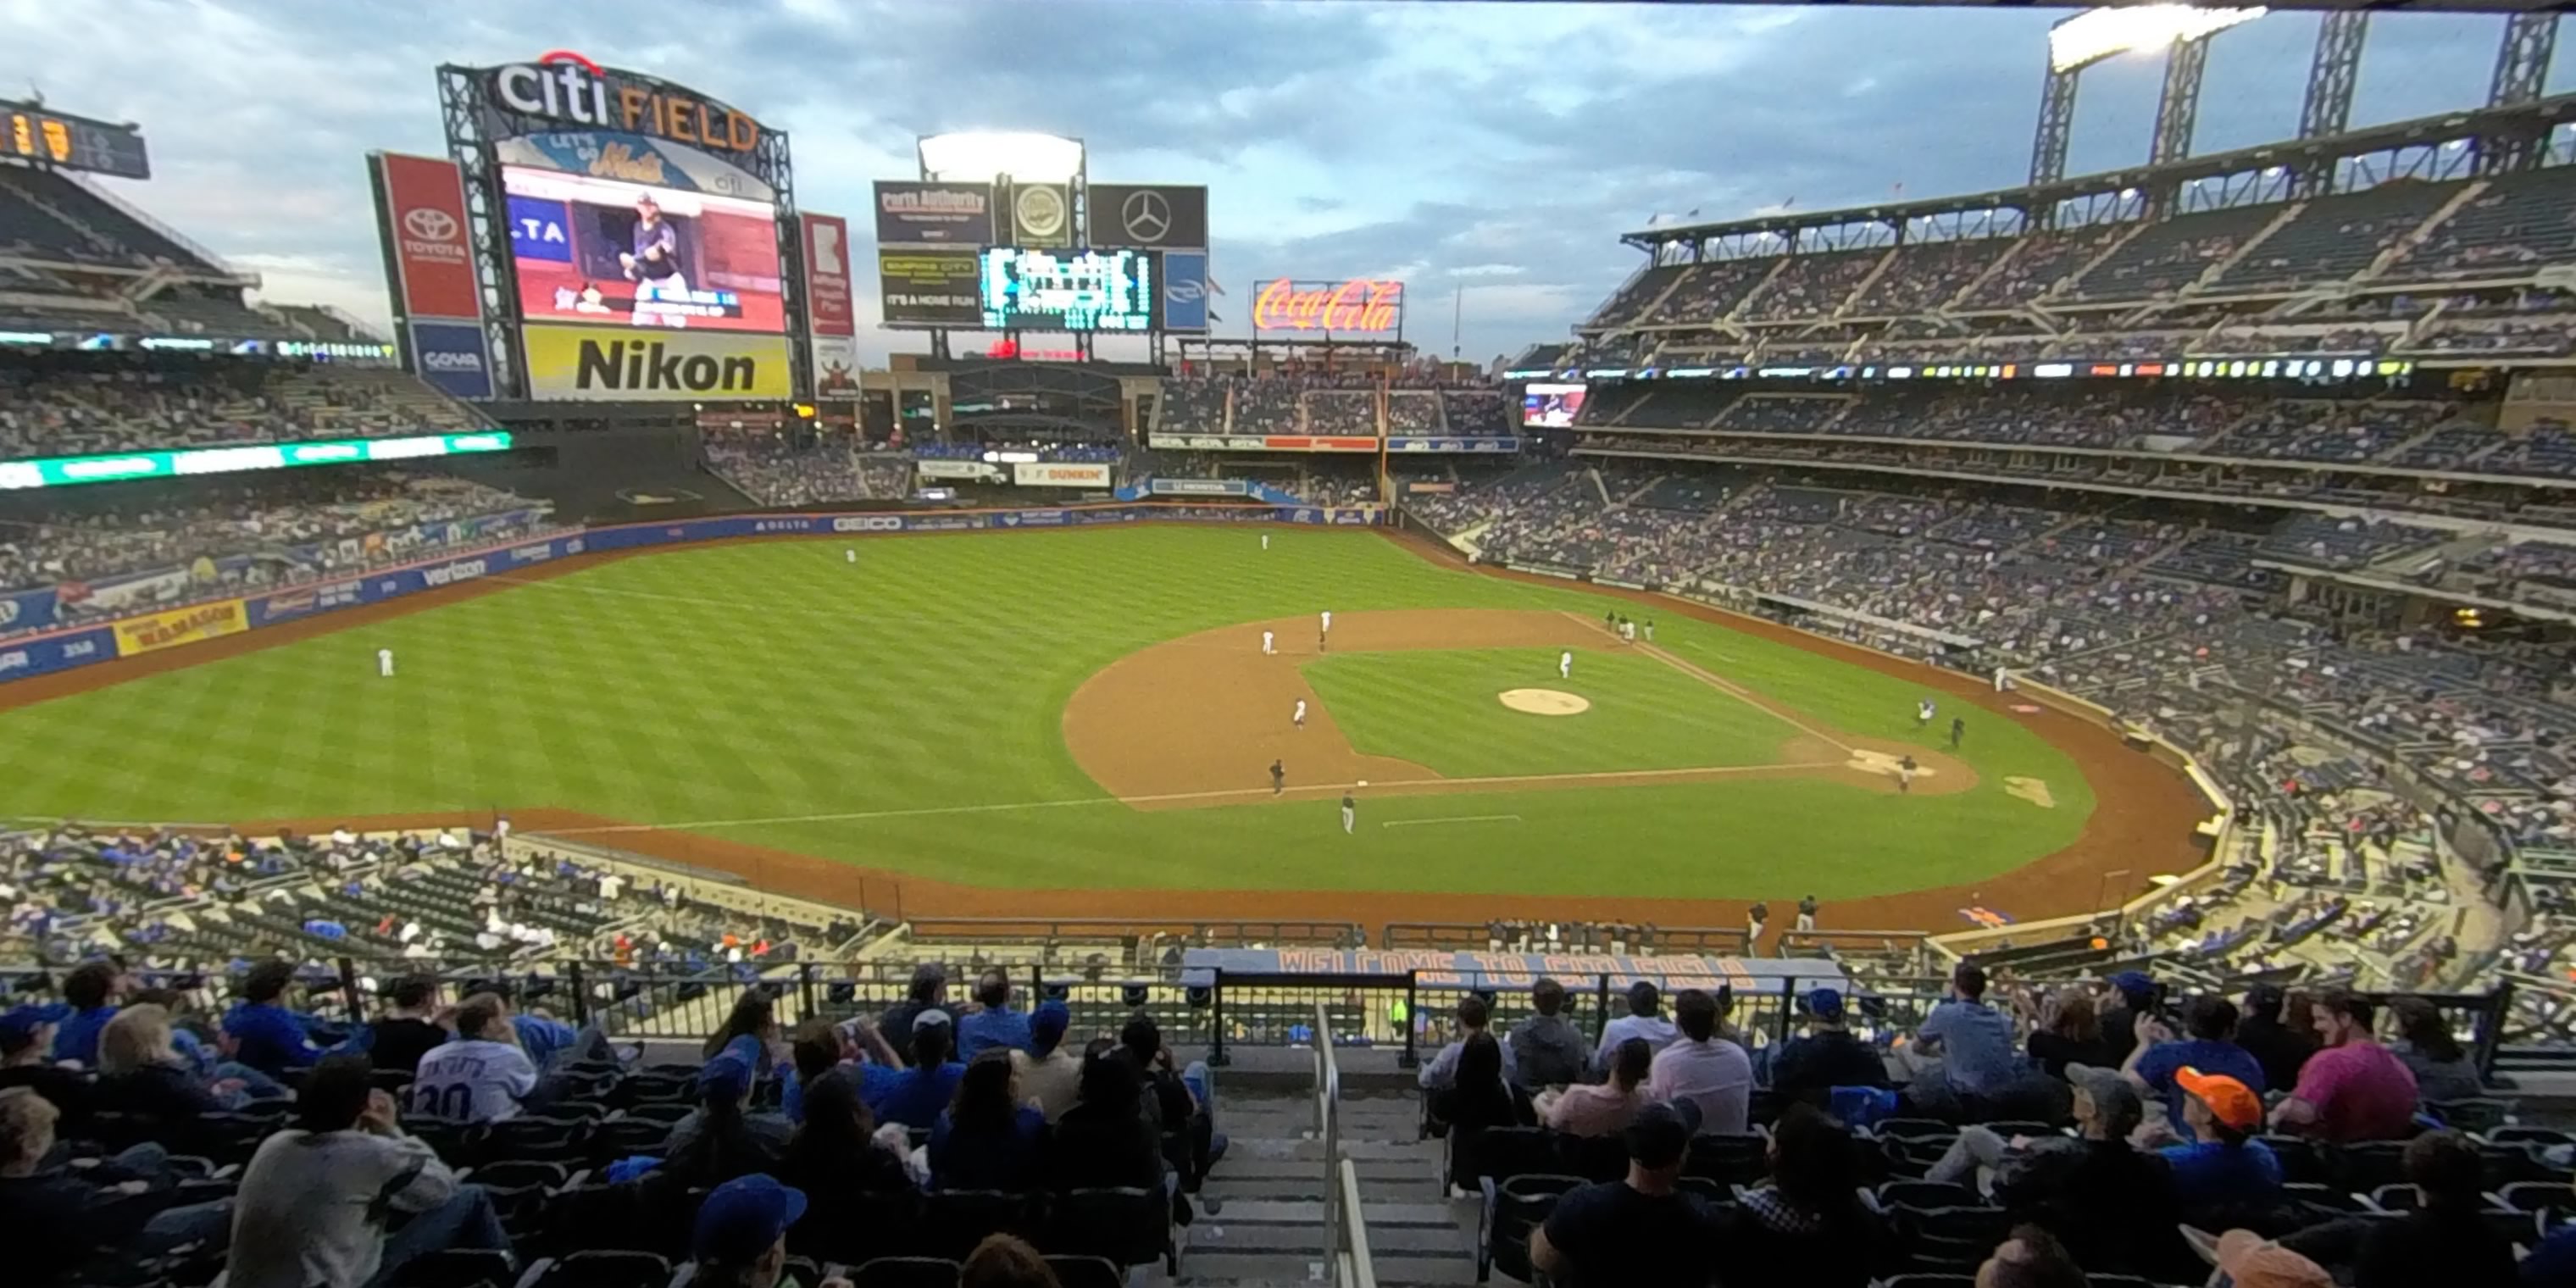 section 327 panoramic seat view  - citi field